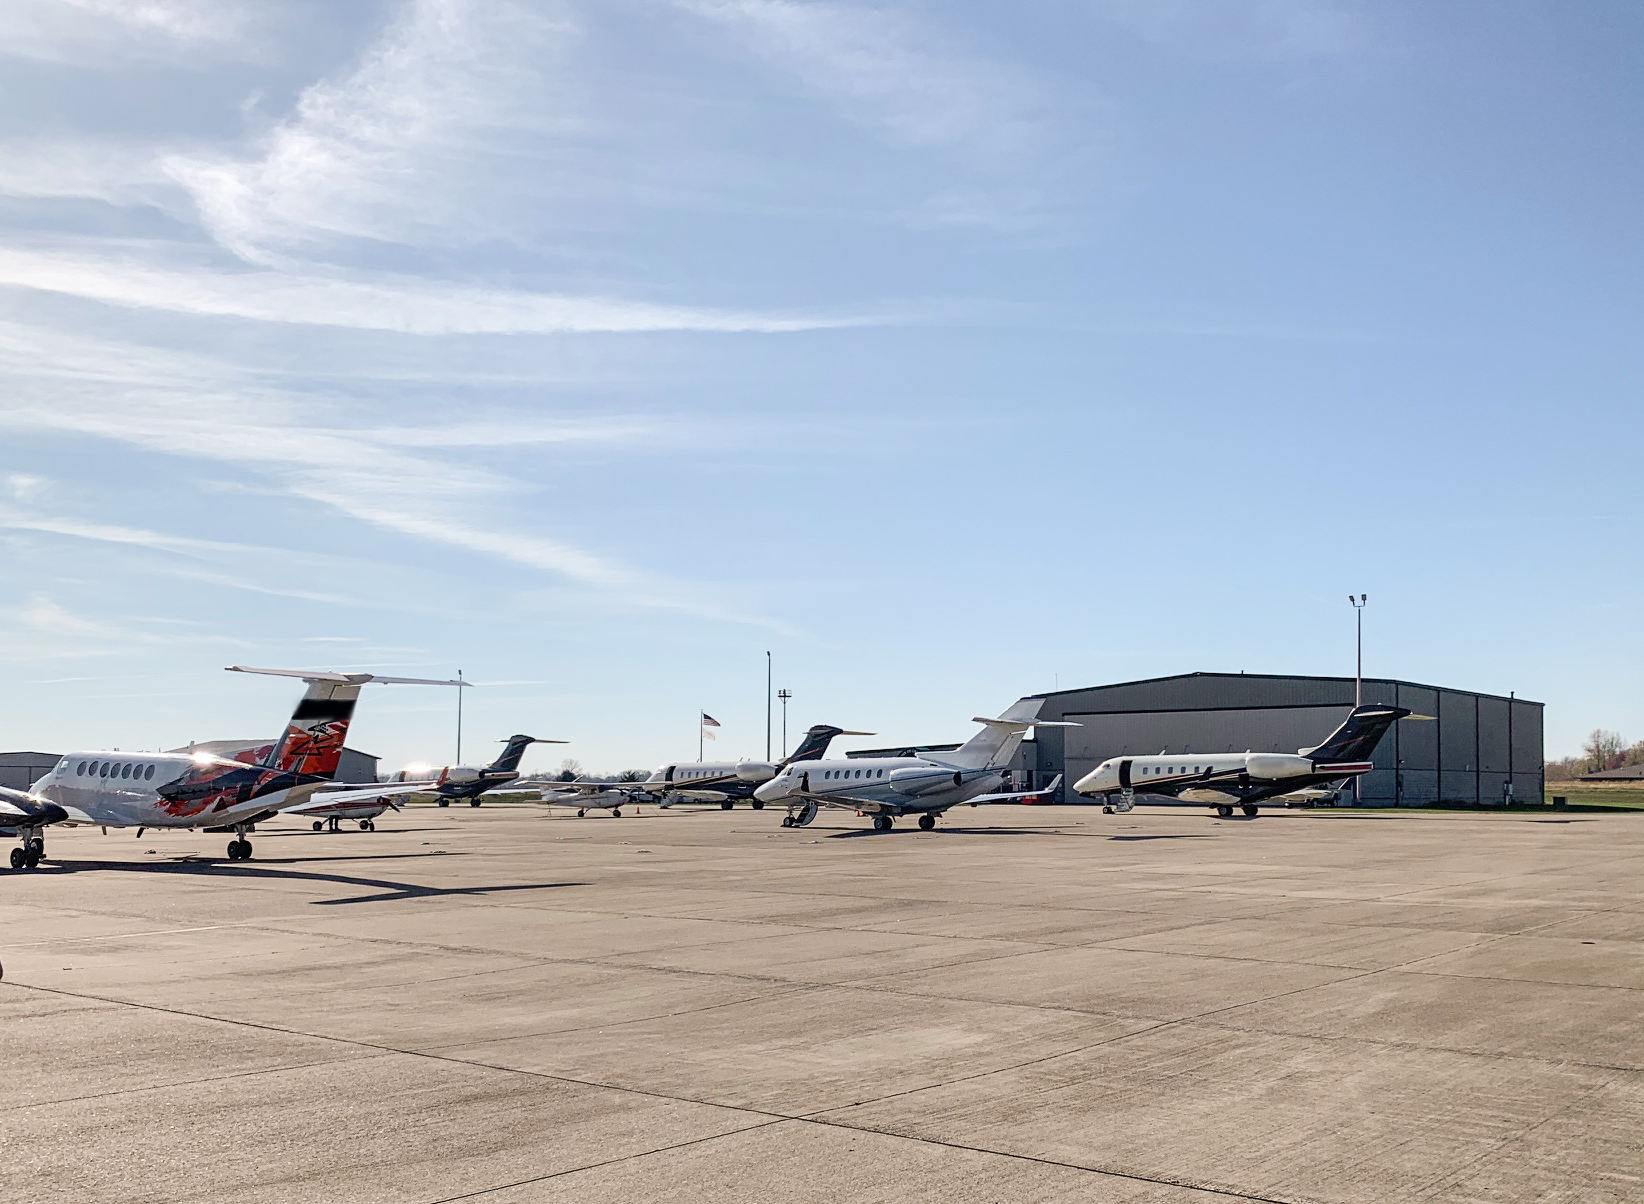 Photo of airplanes outside of an airport with a hangar in the background